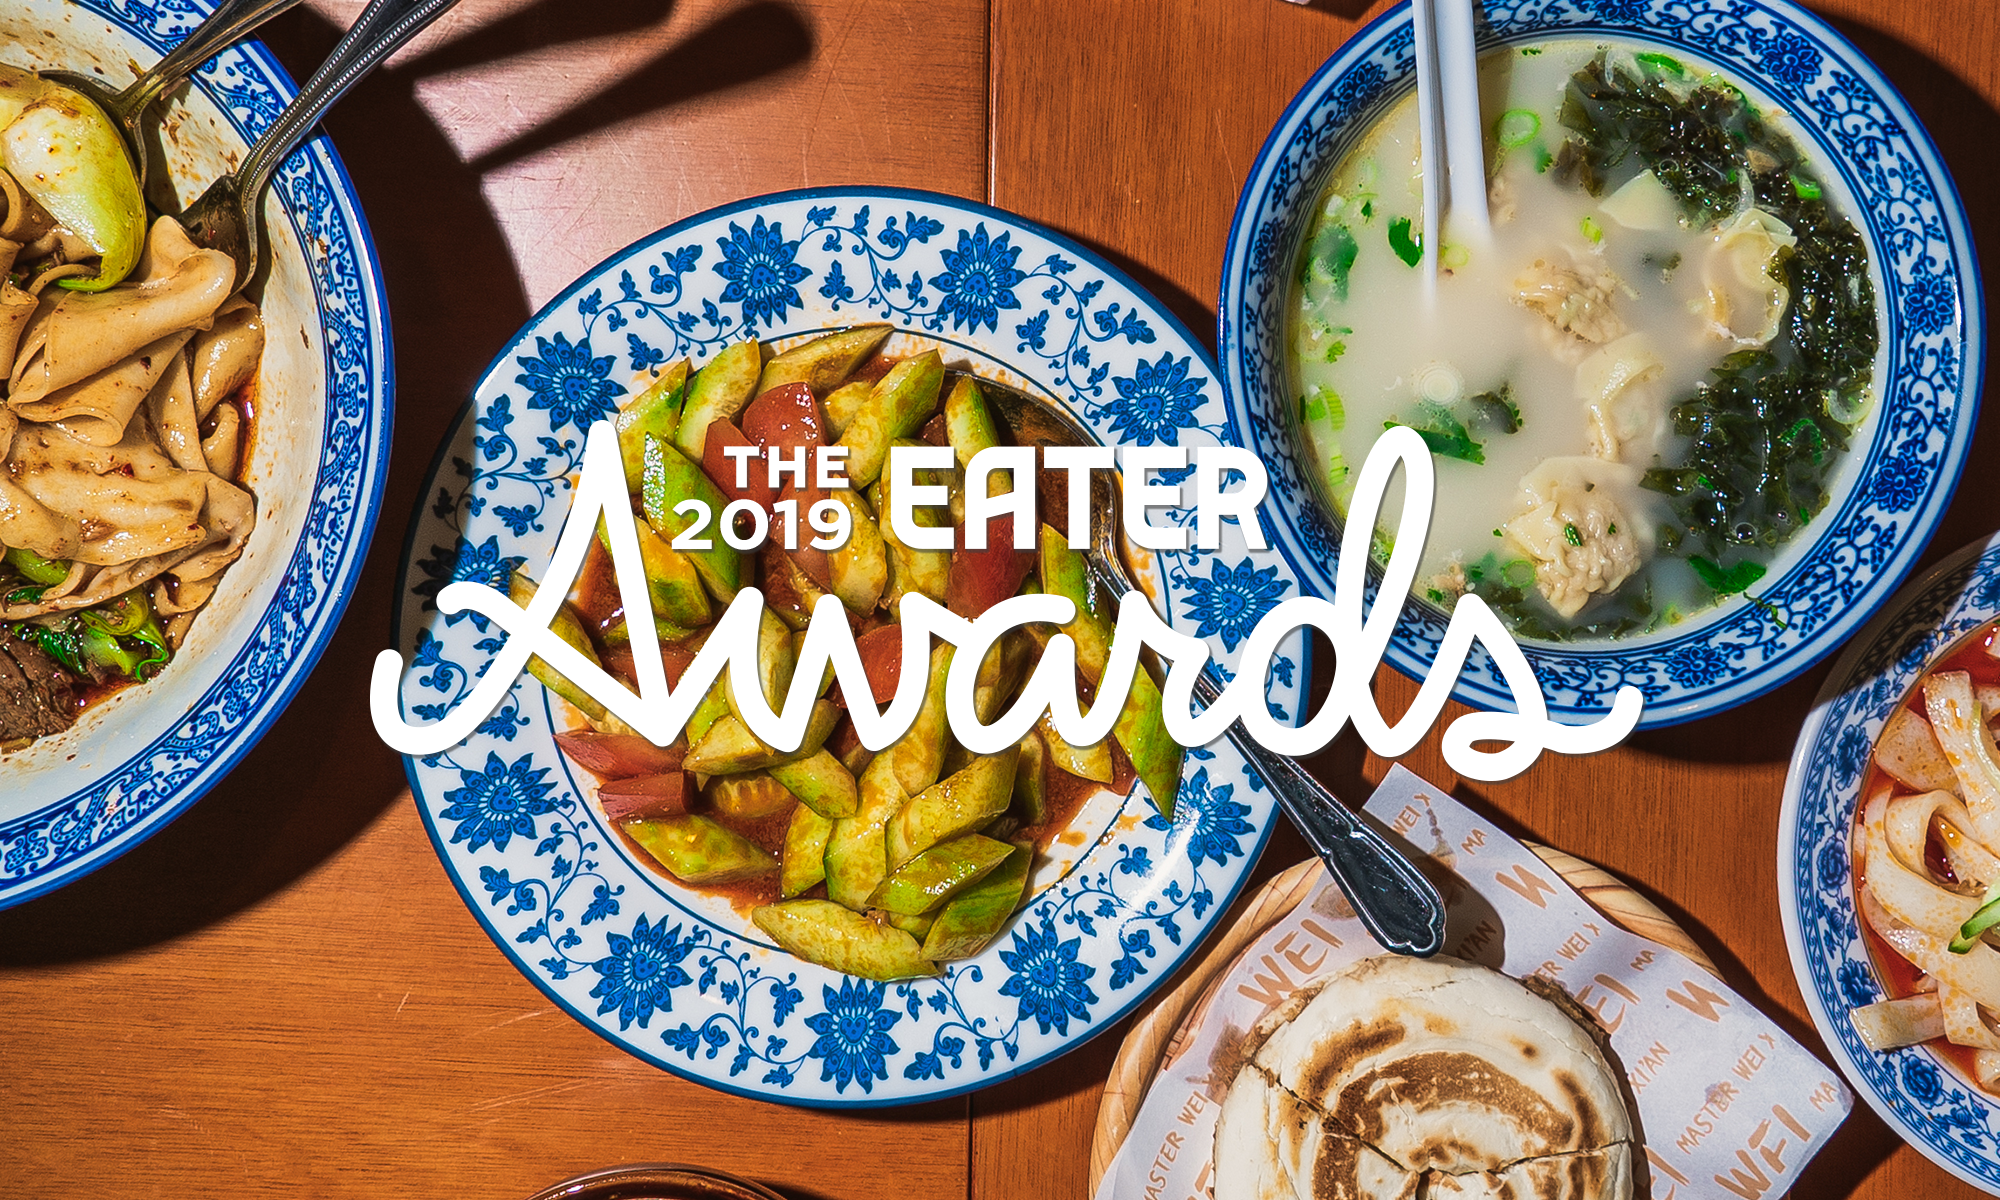 Wei Guirong’s Master Wei in Bloomsbury is Eater London’s Restaurant of the Year, 2019